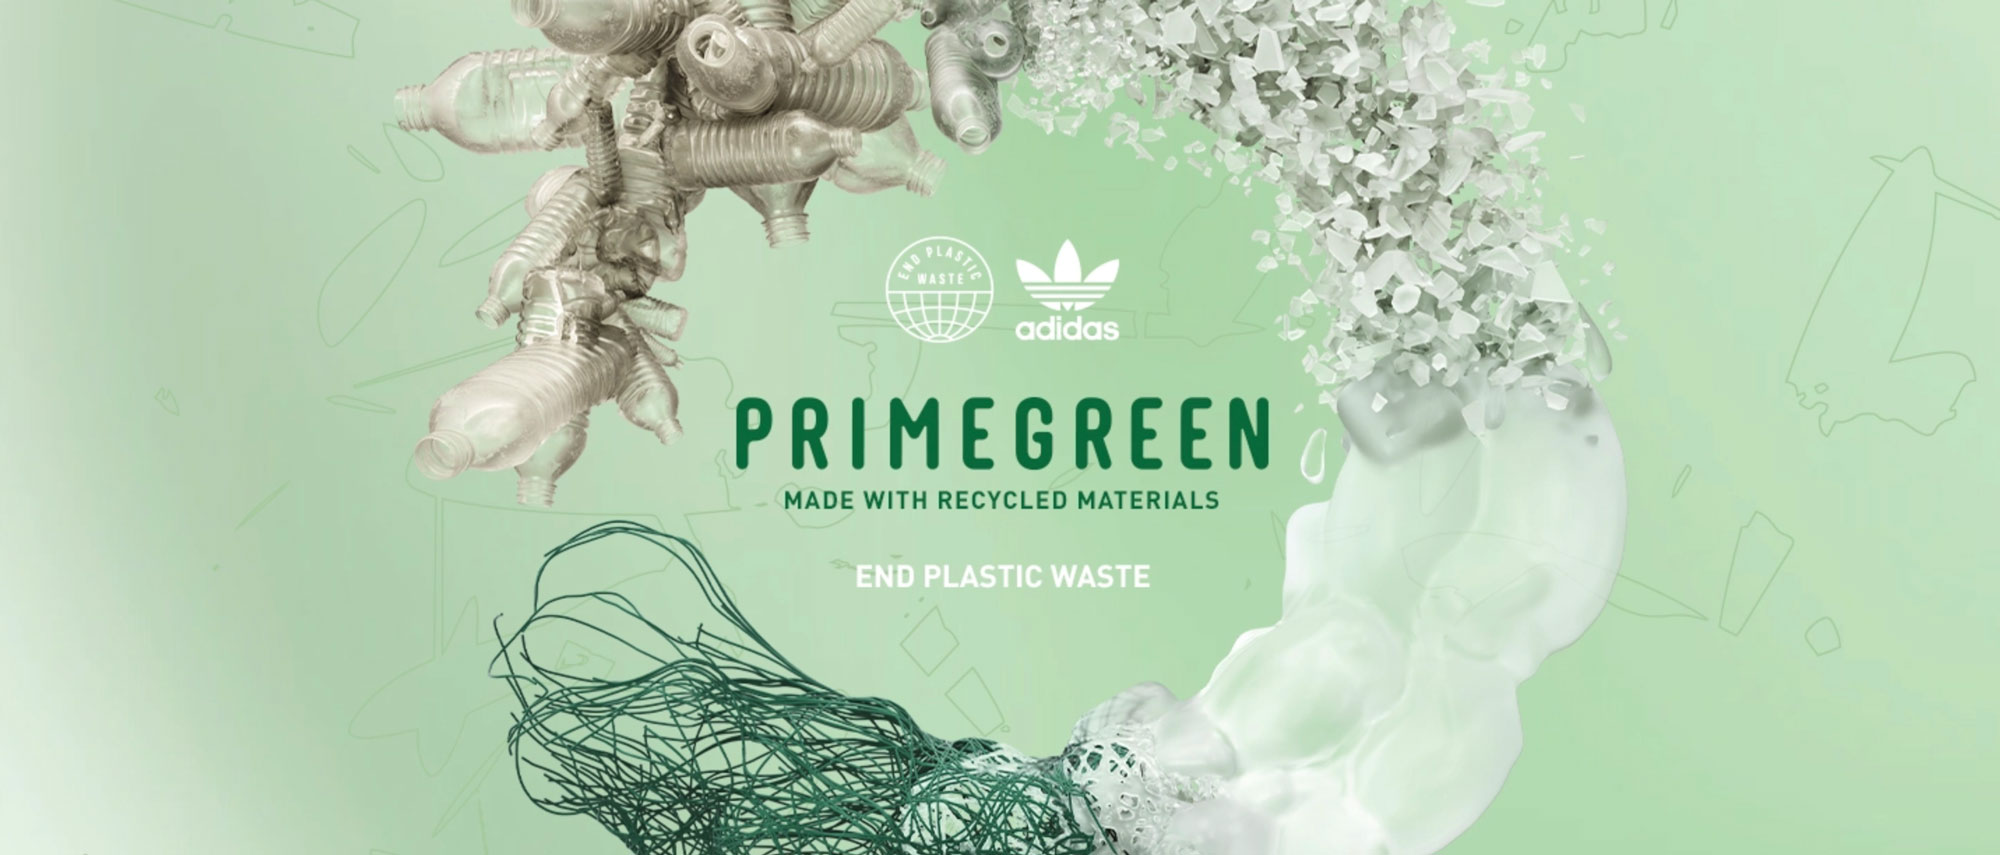 What is Adidas Primegreen?